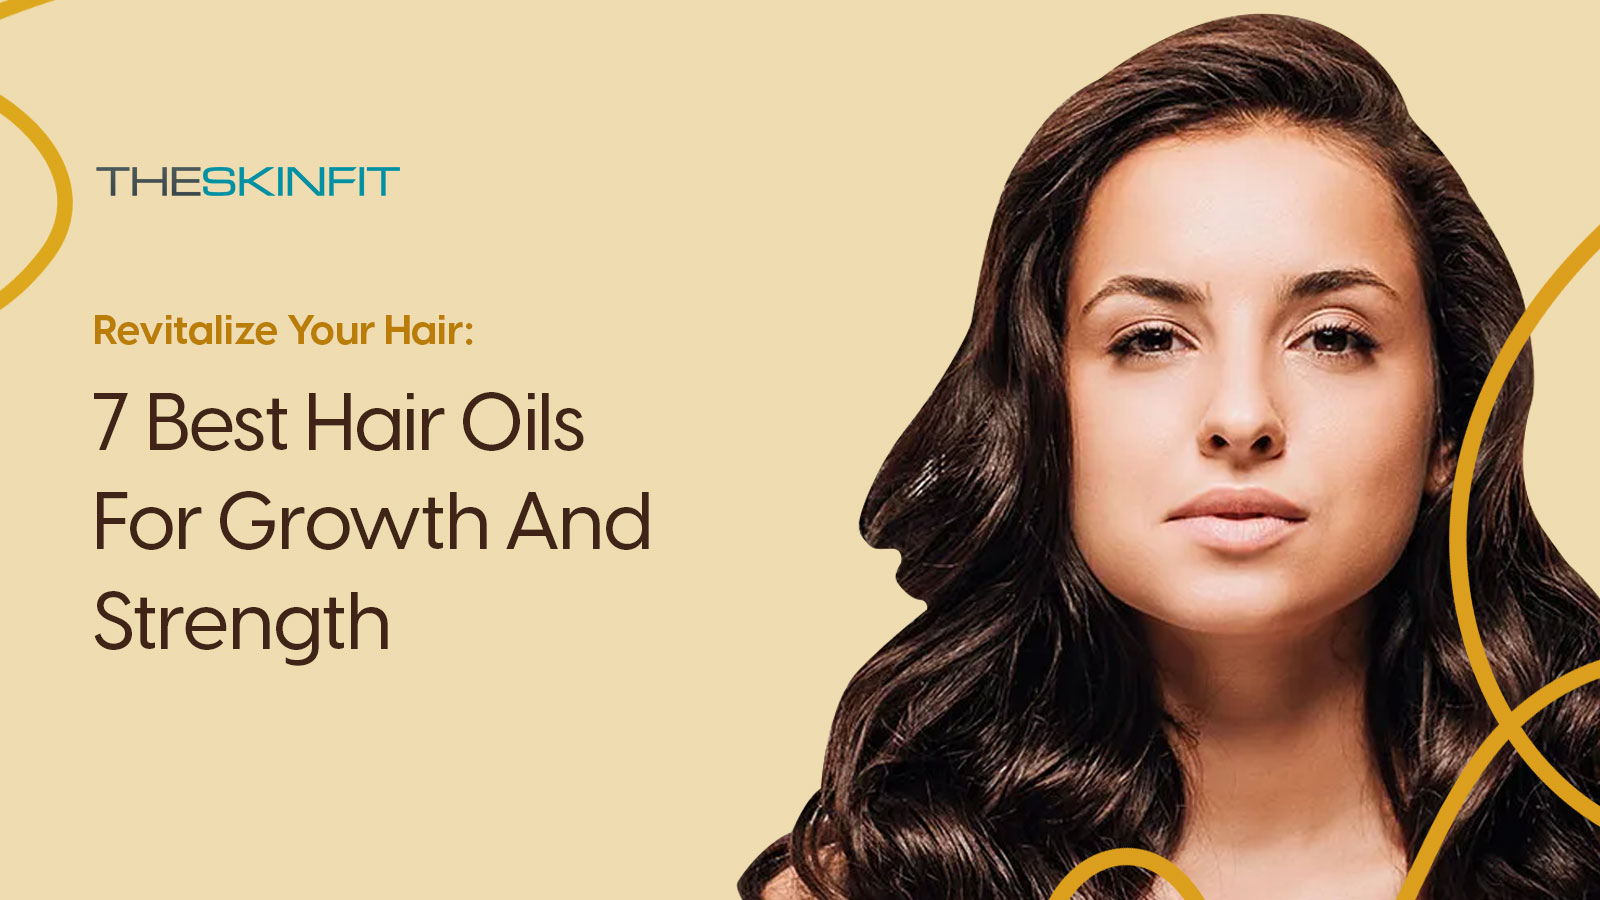 Unlock Your Hair Growth Potential With 7 Best Hair Oils 